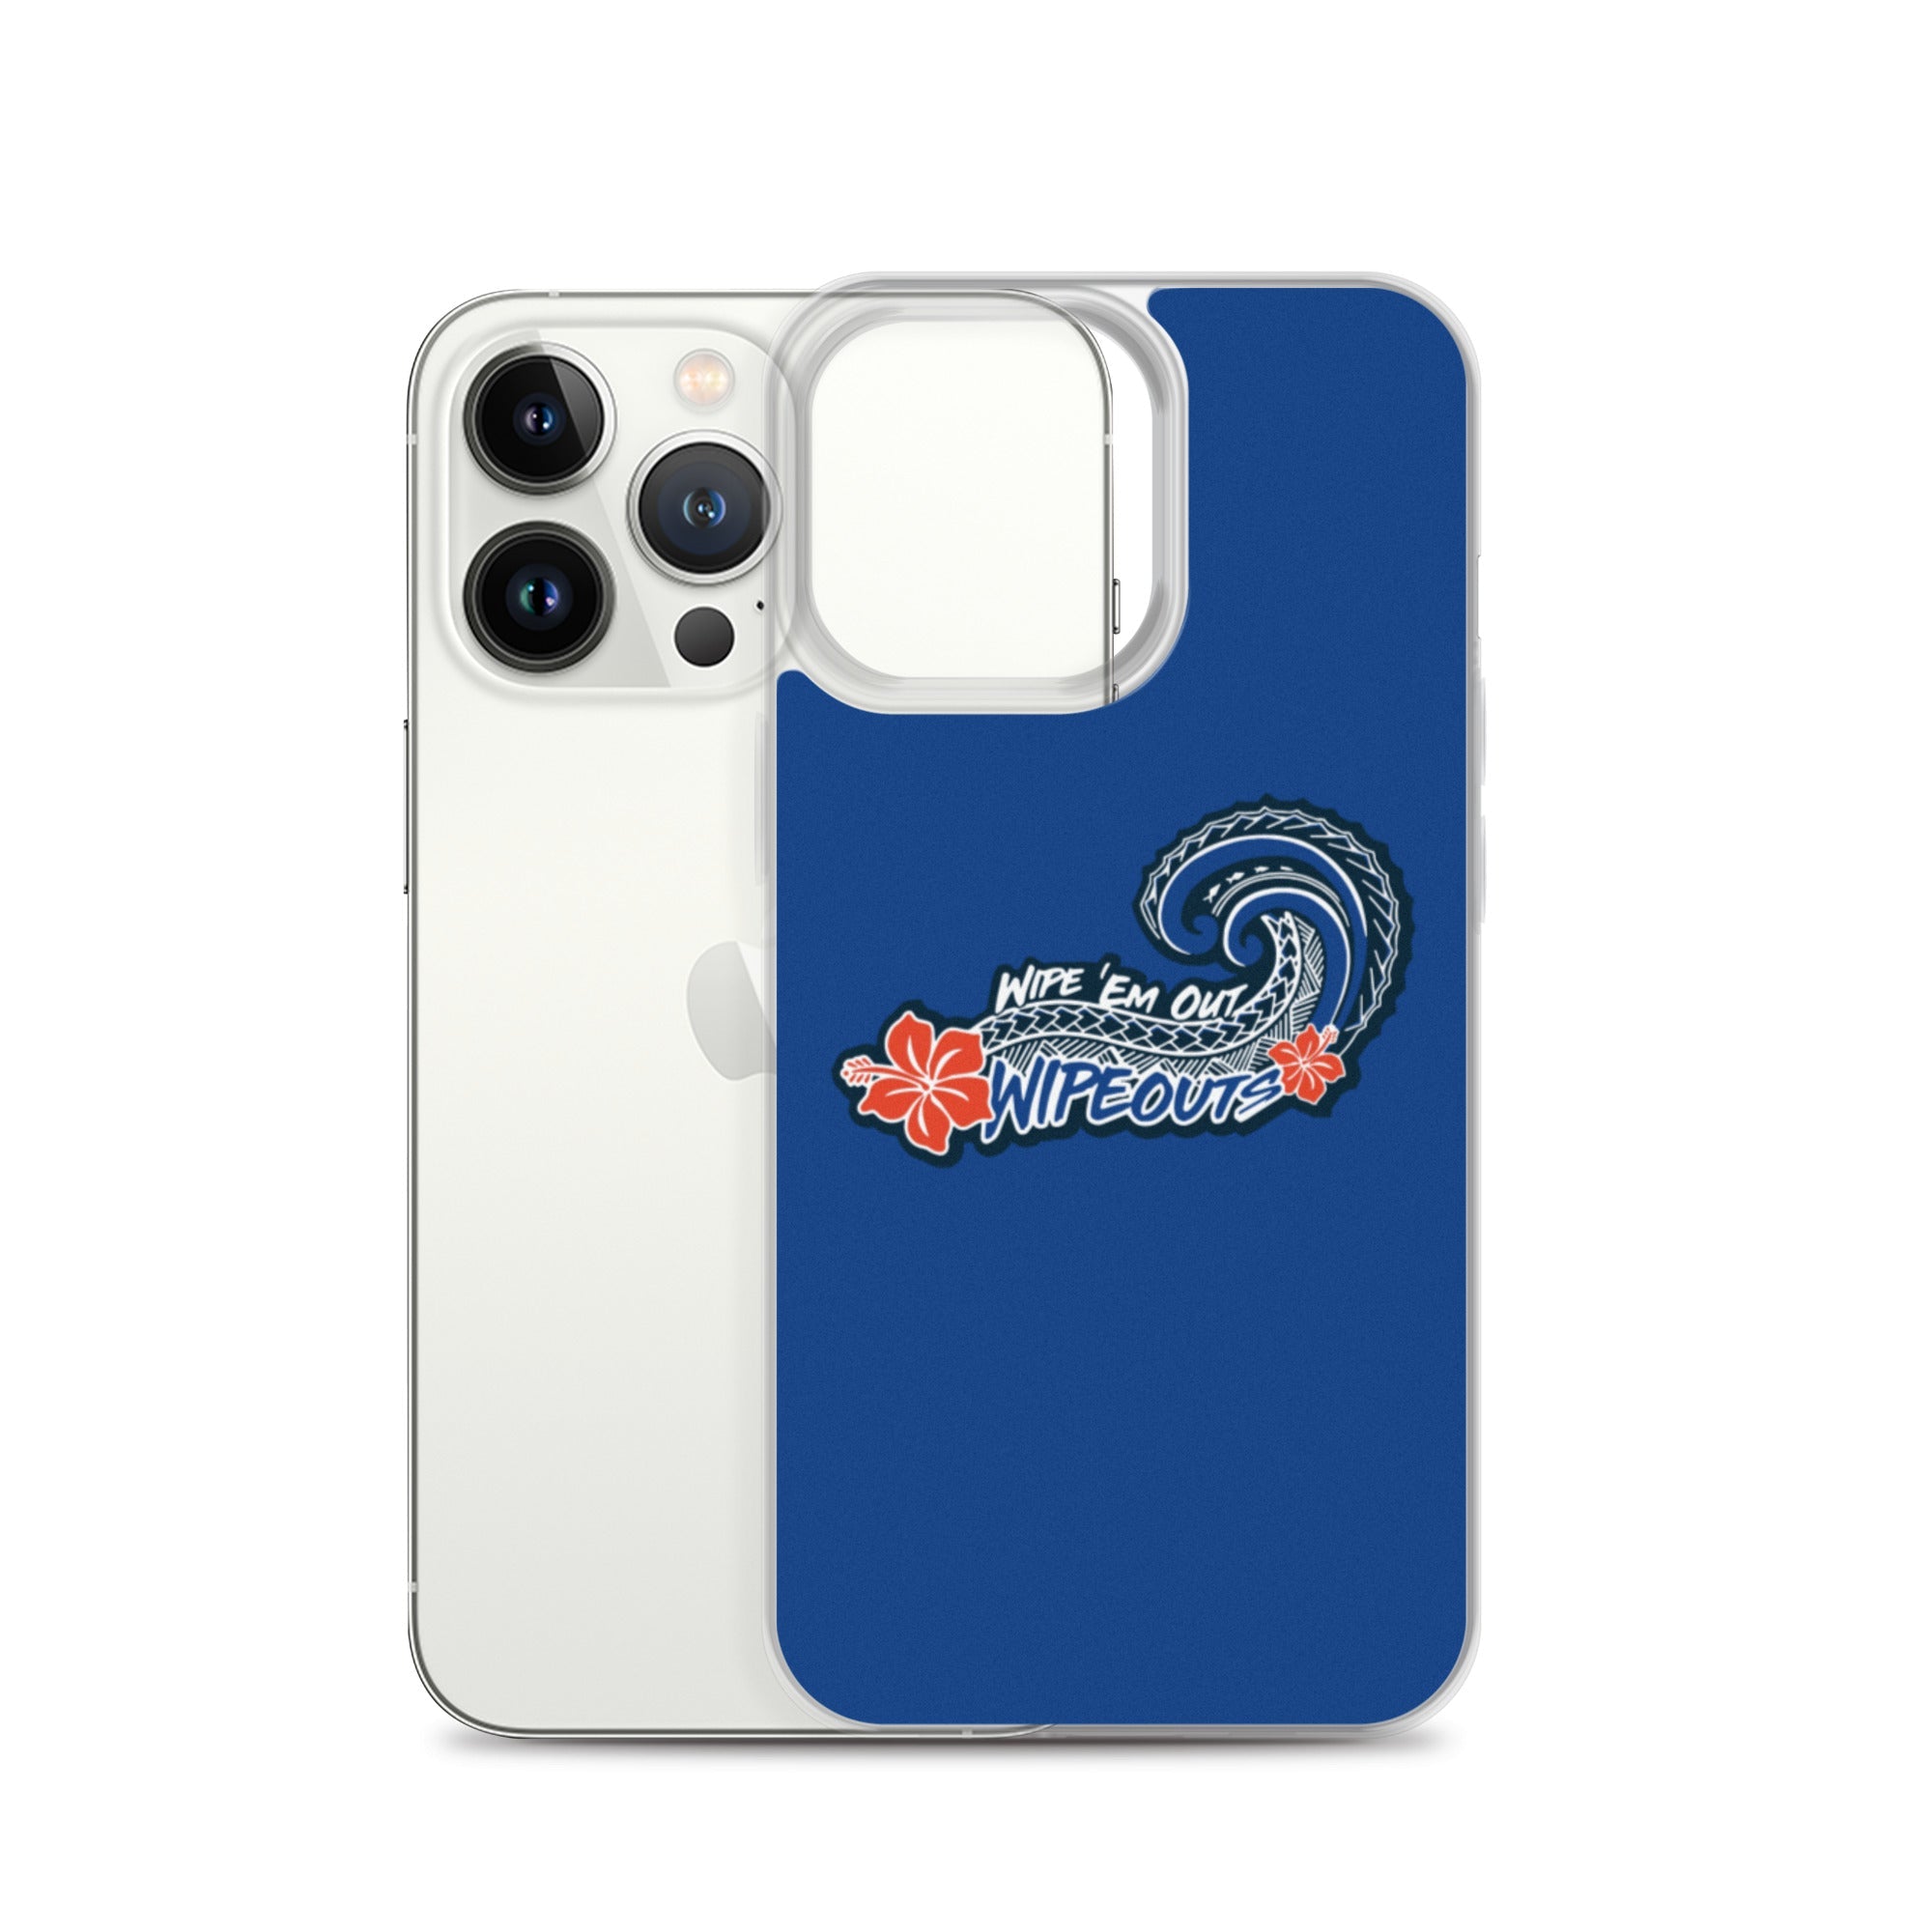 IEW iPhone Case